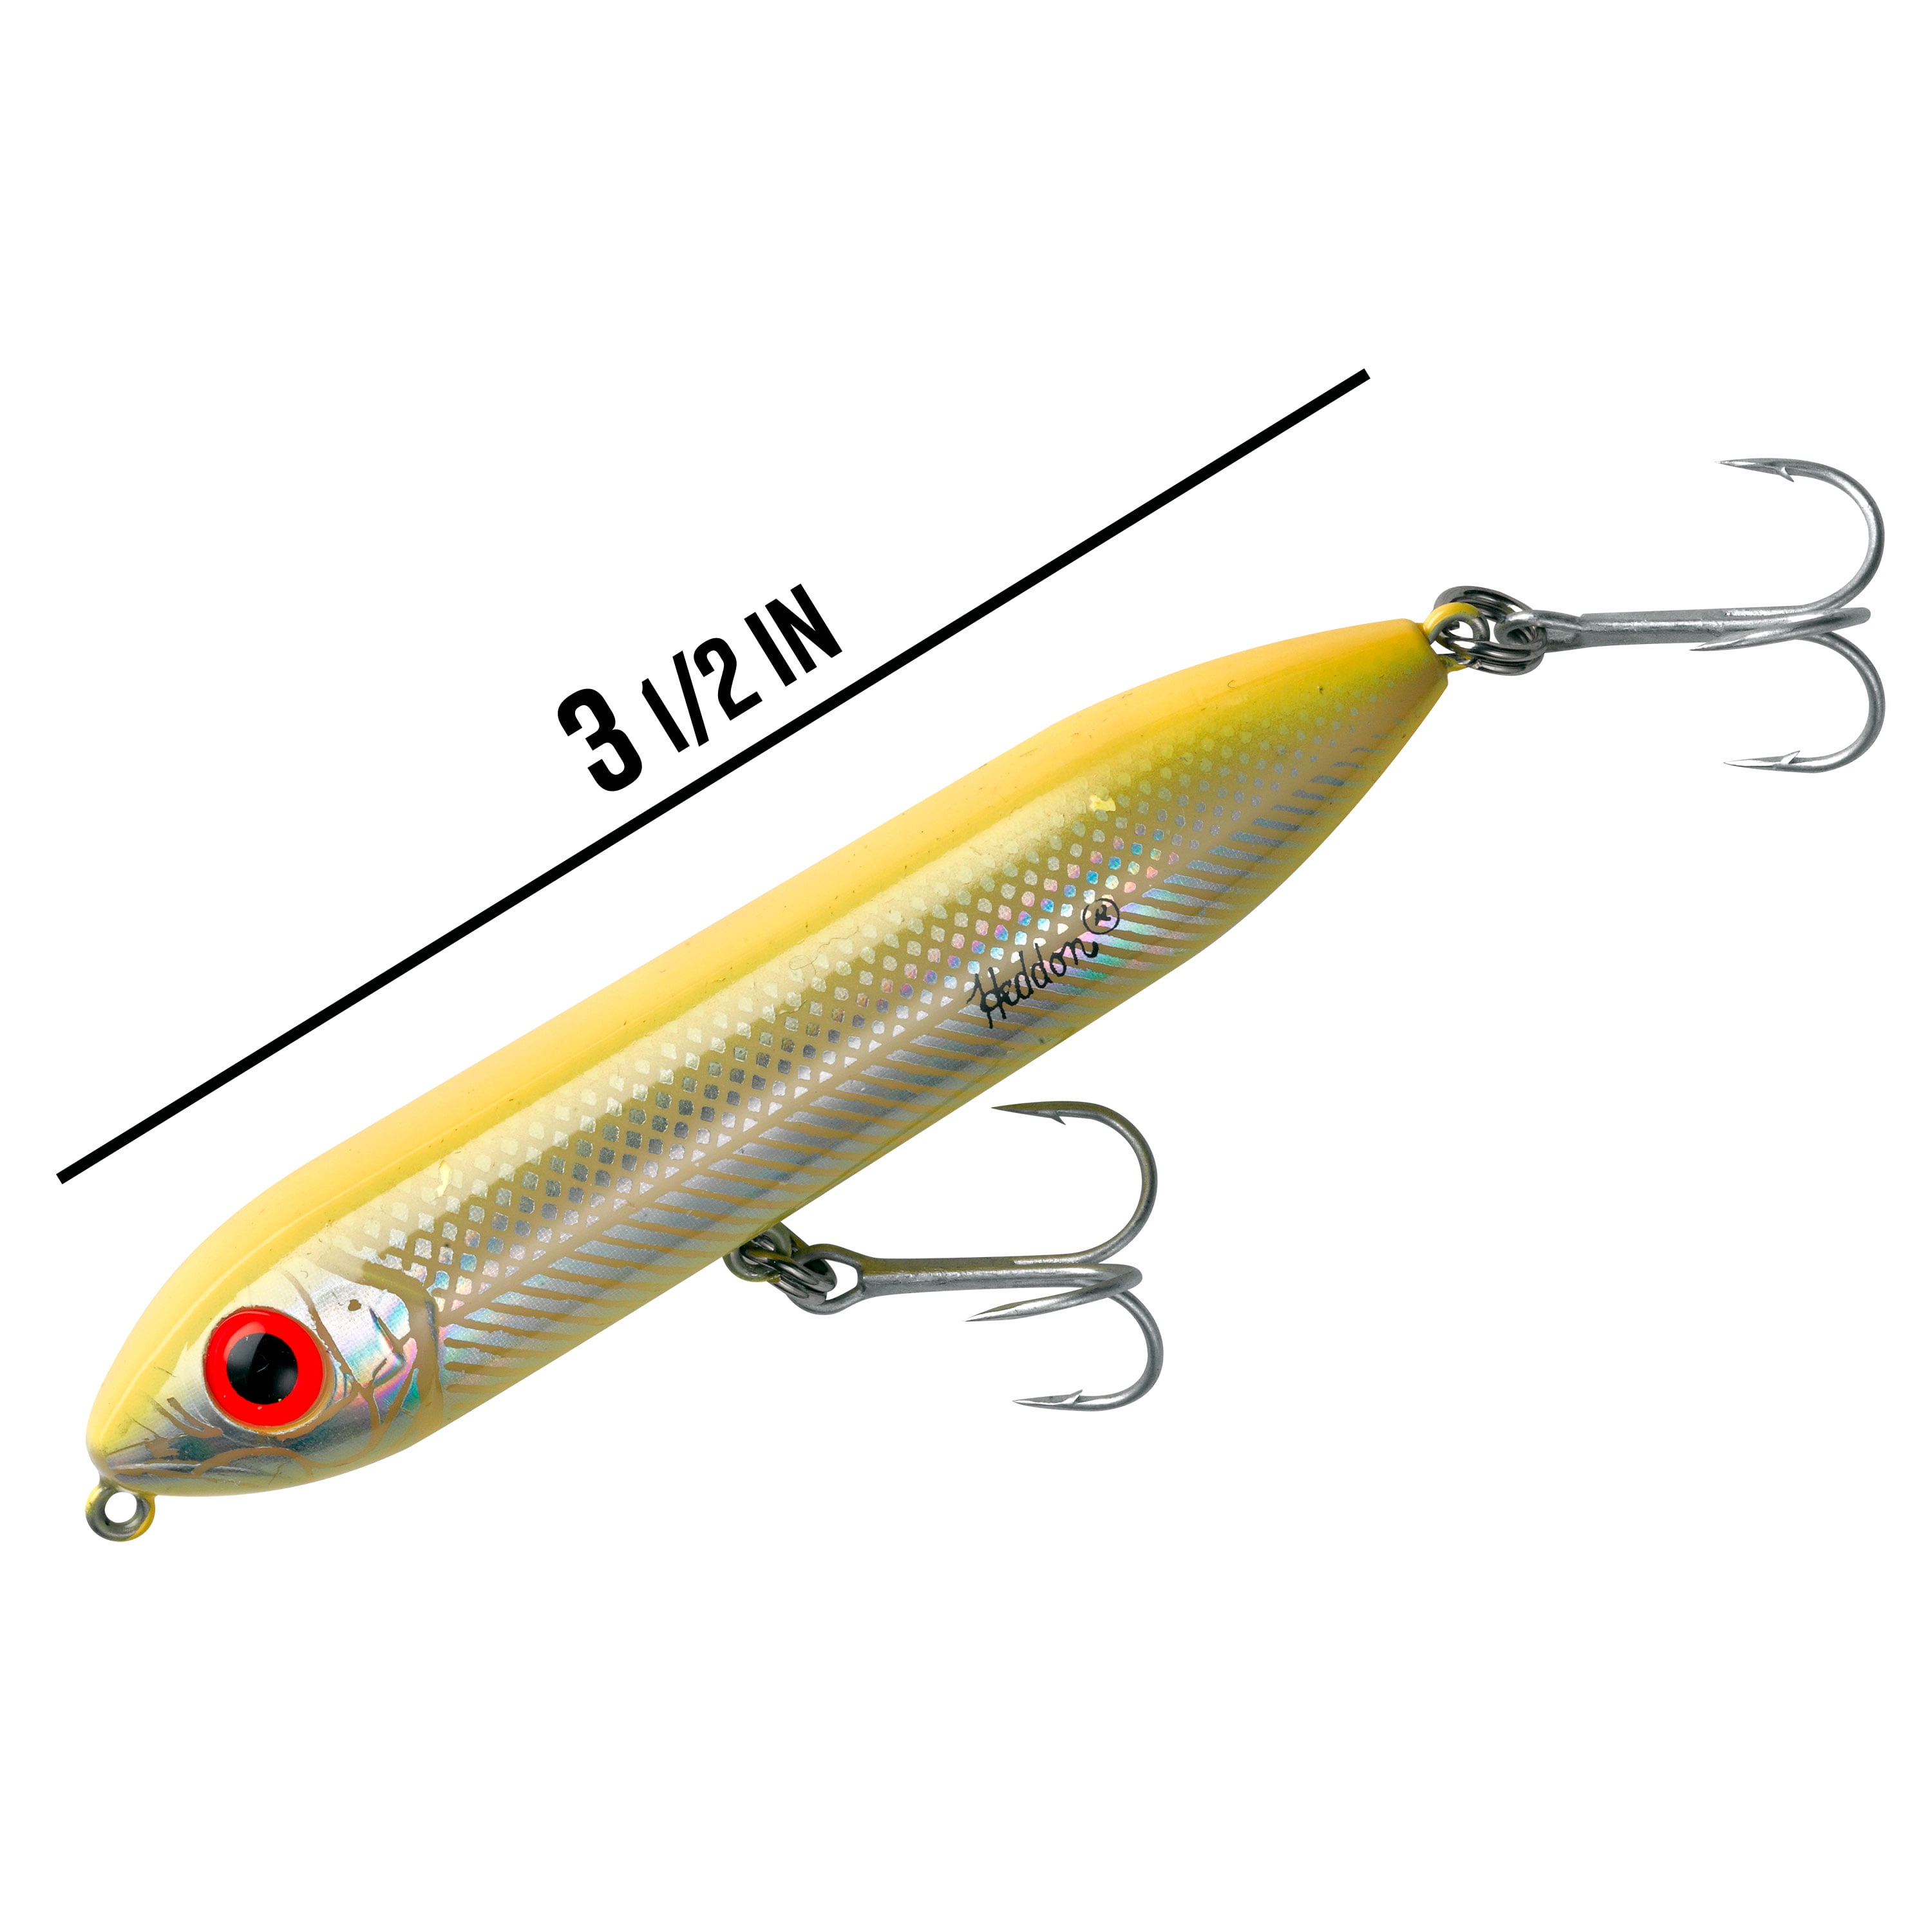 Heddon Super Spook Fishing Lures (Black Shore Shad, 5-Inch) - Pike Frenzy